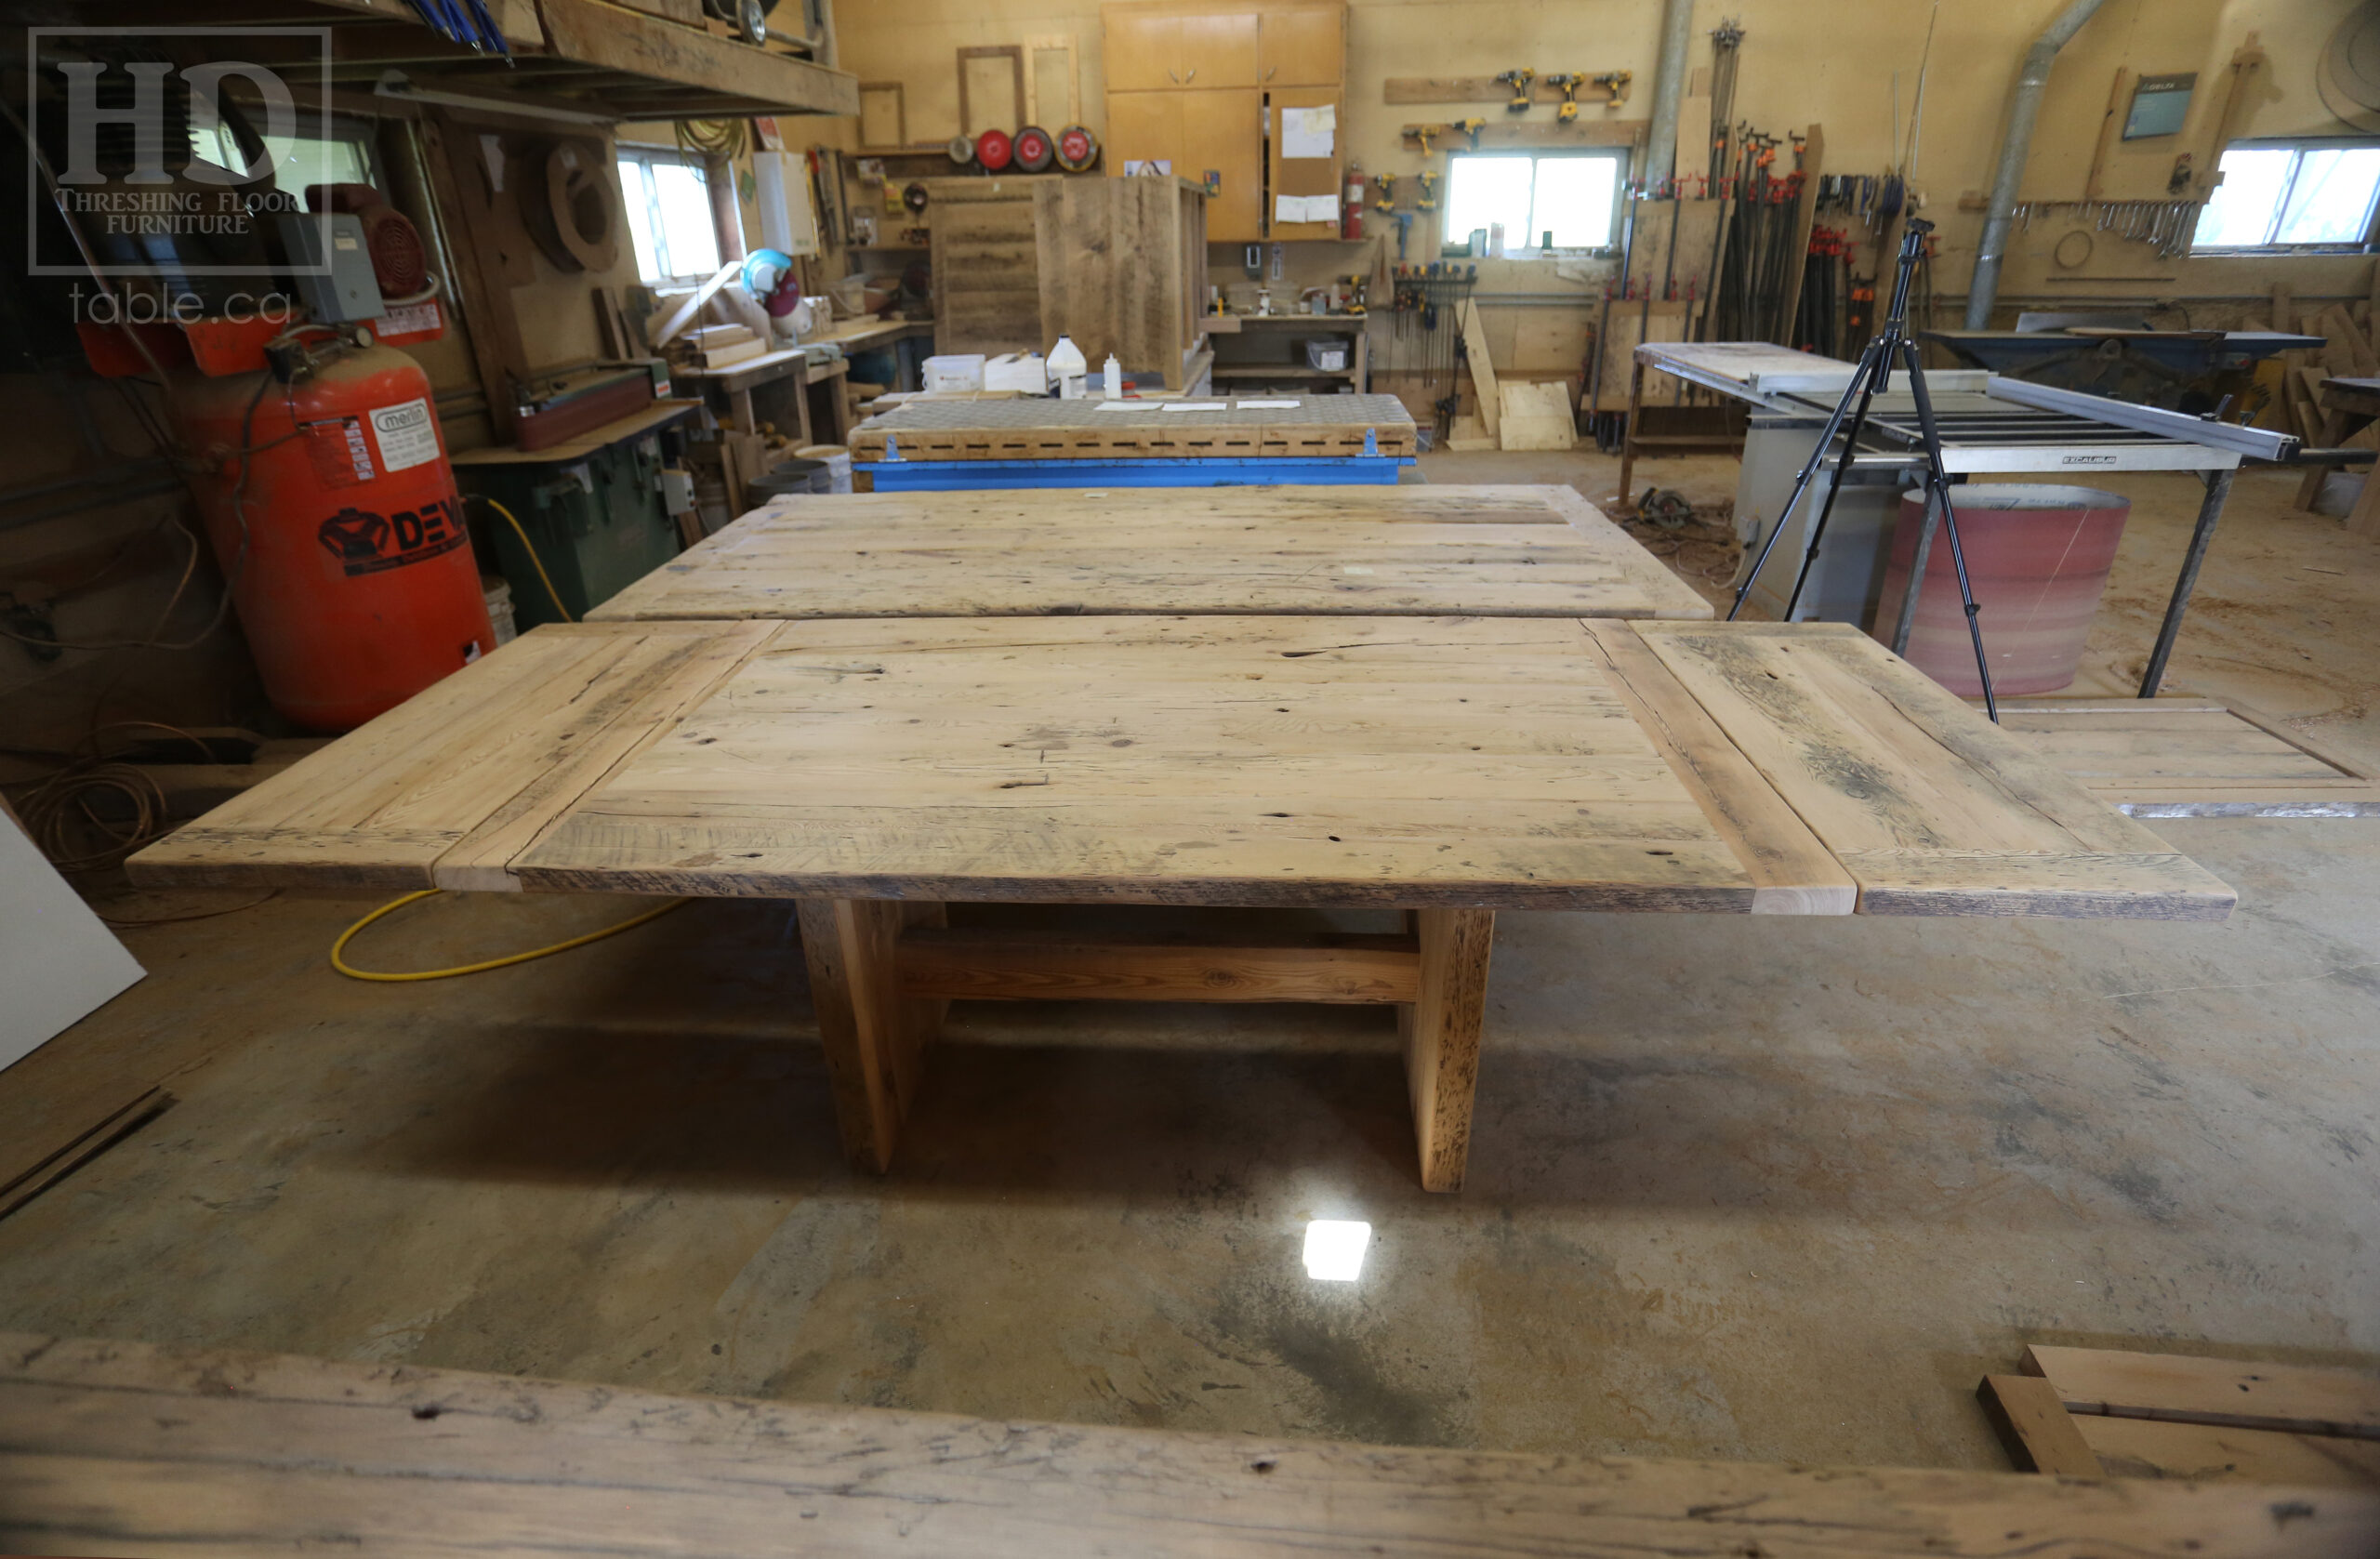 6’ Ontario Barnwood Table we made for a Milton, Ontario Home – 42” wide – Plank Base – Bread Board Ends - Old Growth Reclaimed Hemlock Threshing Floor Construction – Original edges & distressing maintained - Premium epoxy + satin polyurethane finish – [2] 18” Leaves - www.table.ca